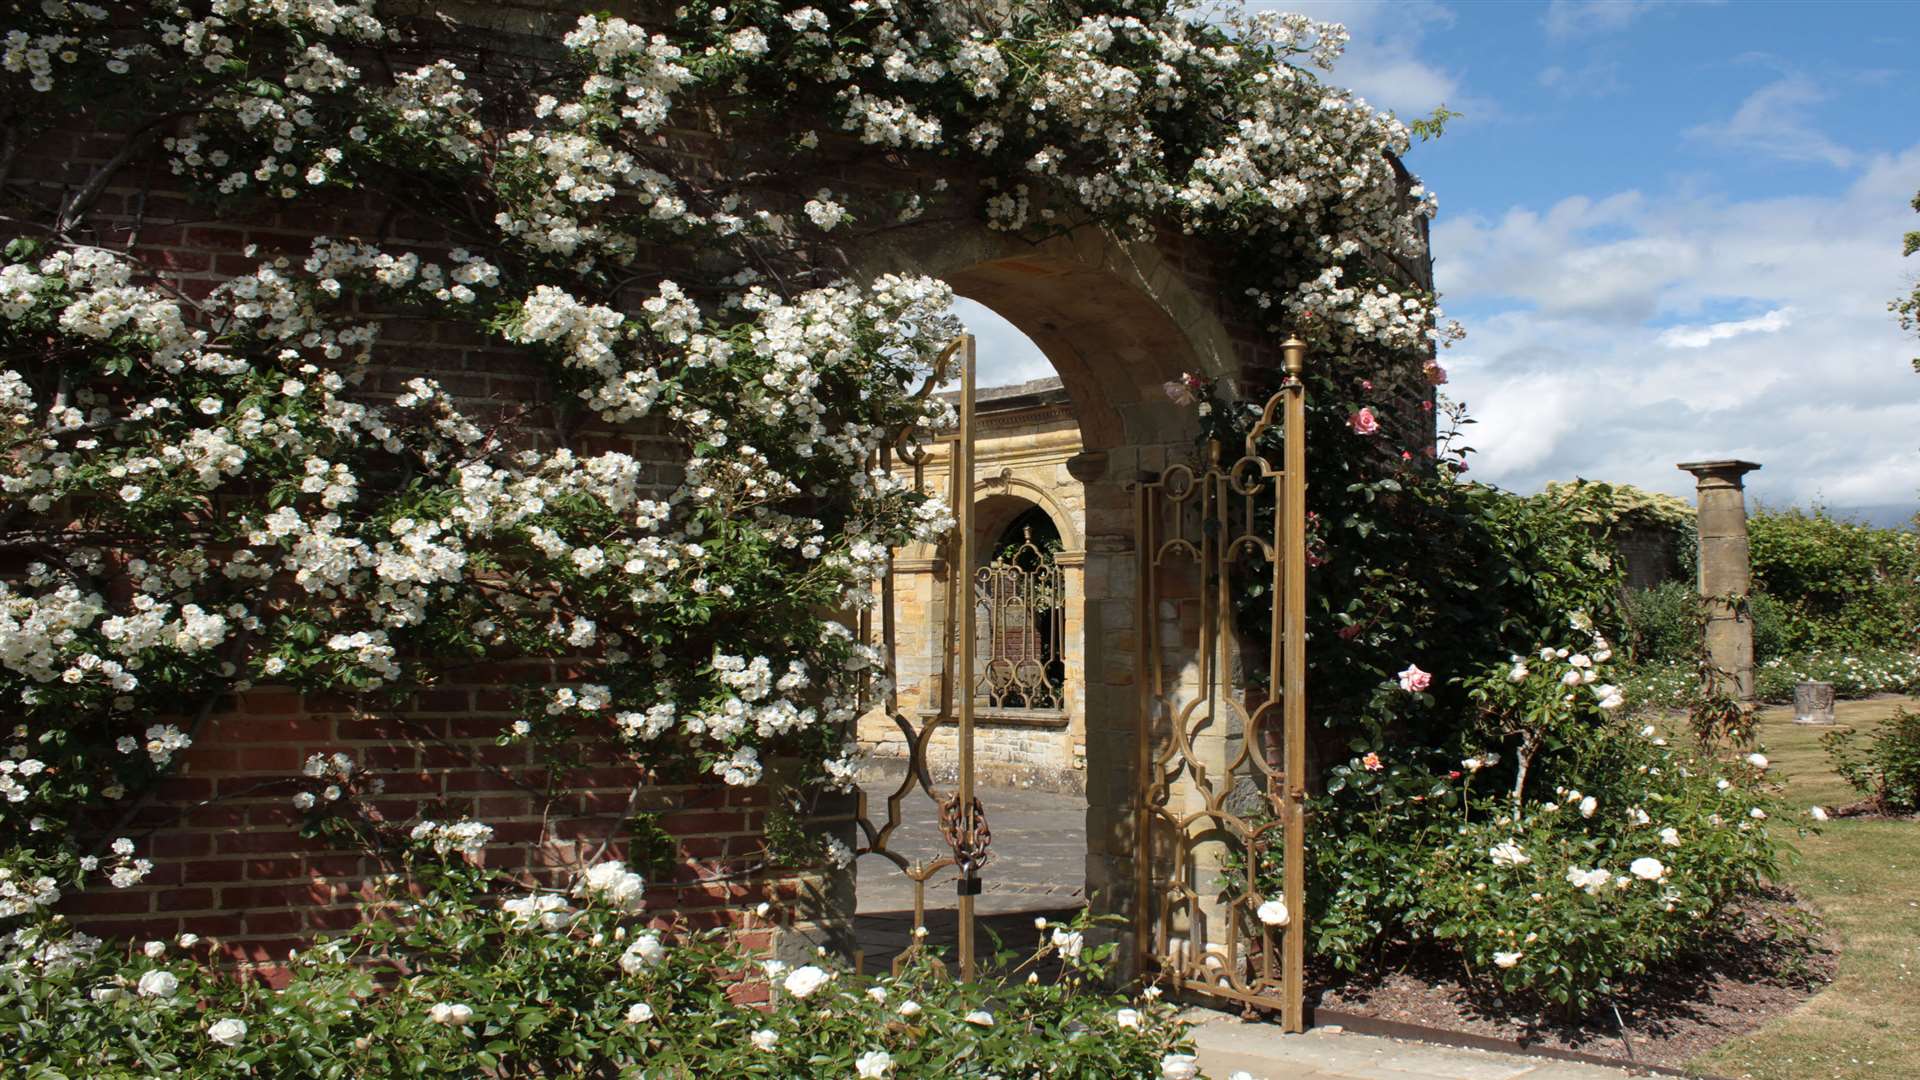 The Hever in Bloom event will be taking place next month